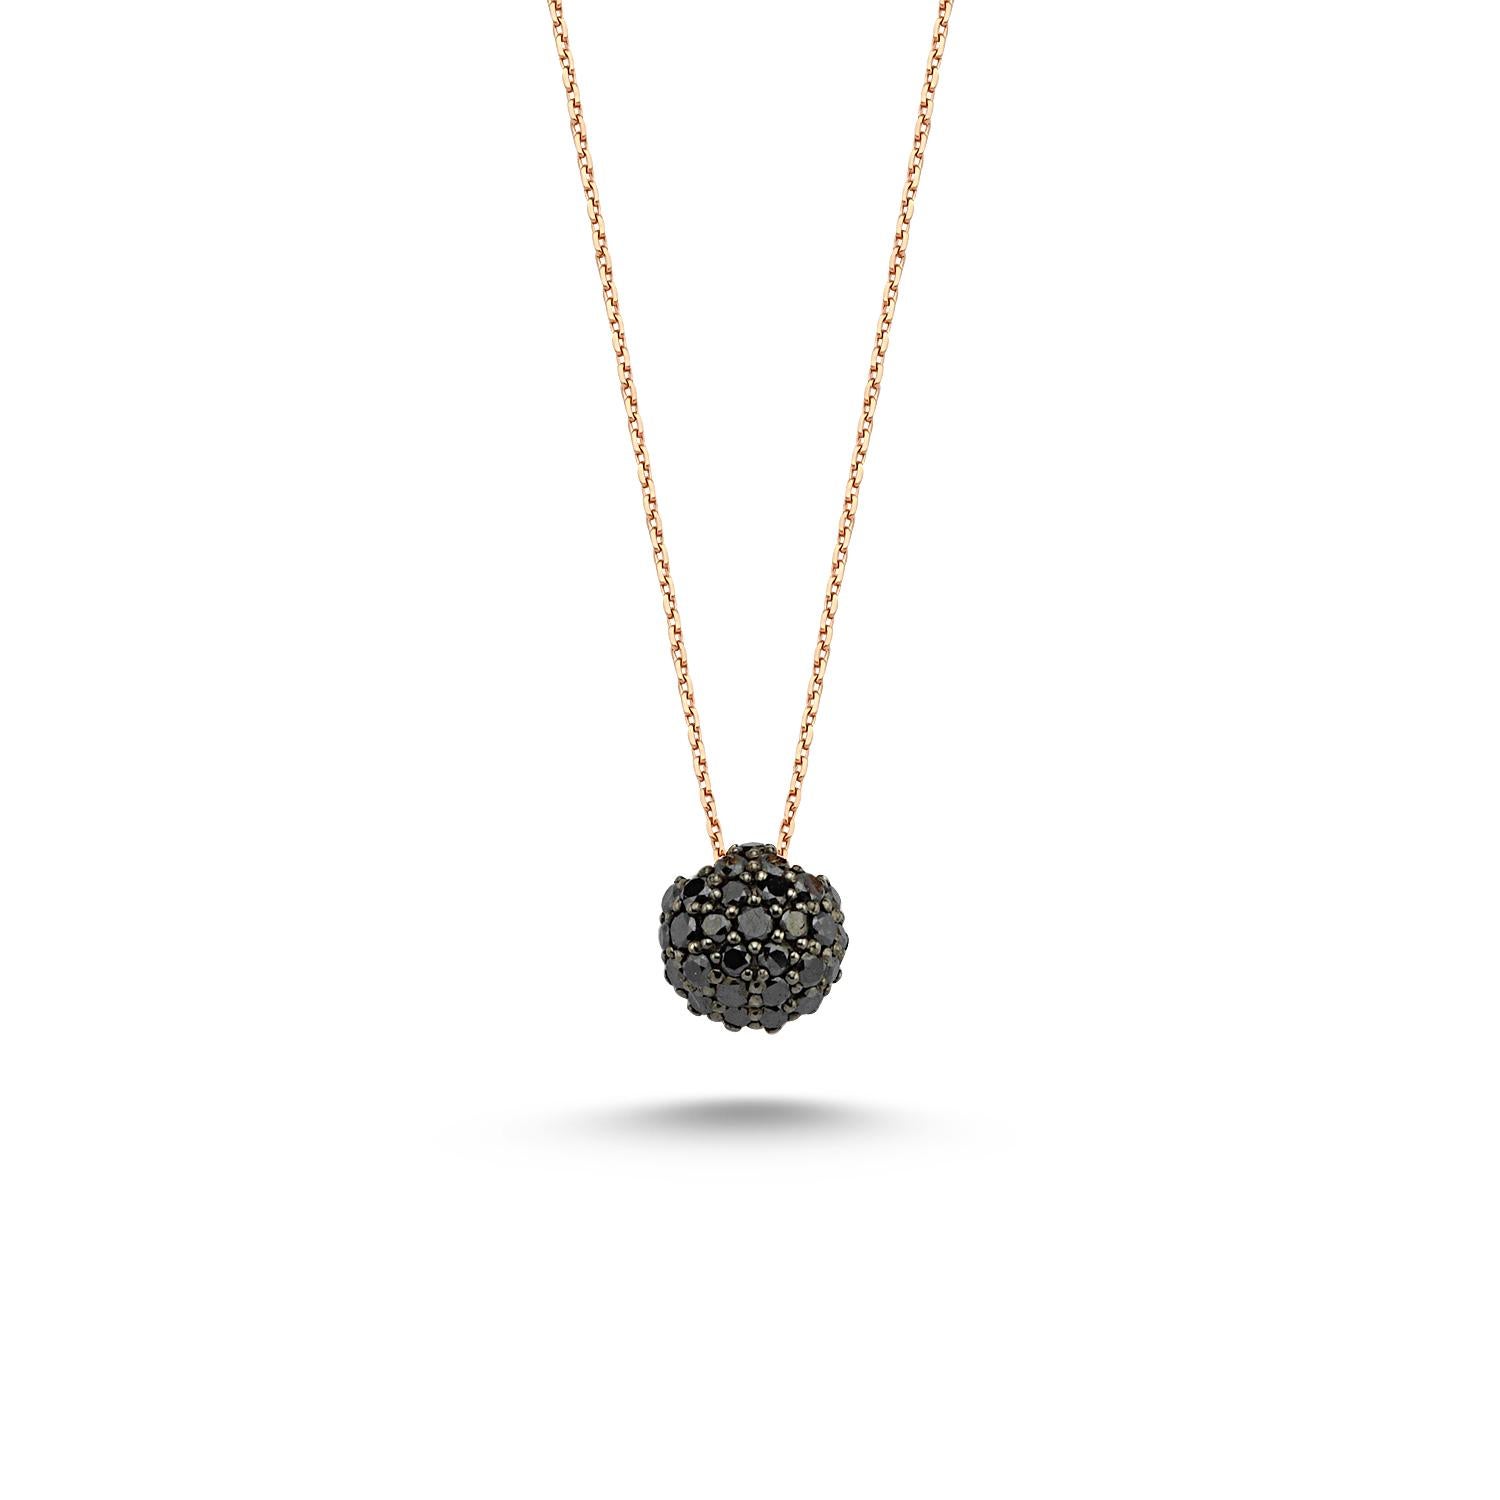 Round black diamond necklace in 14k rose gold by Selda Jewellery

Additional Information:-
Collection: Waves collection
14K Rose gold
0.29ct Black diamond
Pendant height 0.6cm
Chain length 42cm